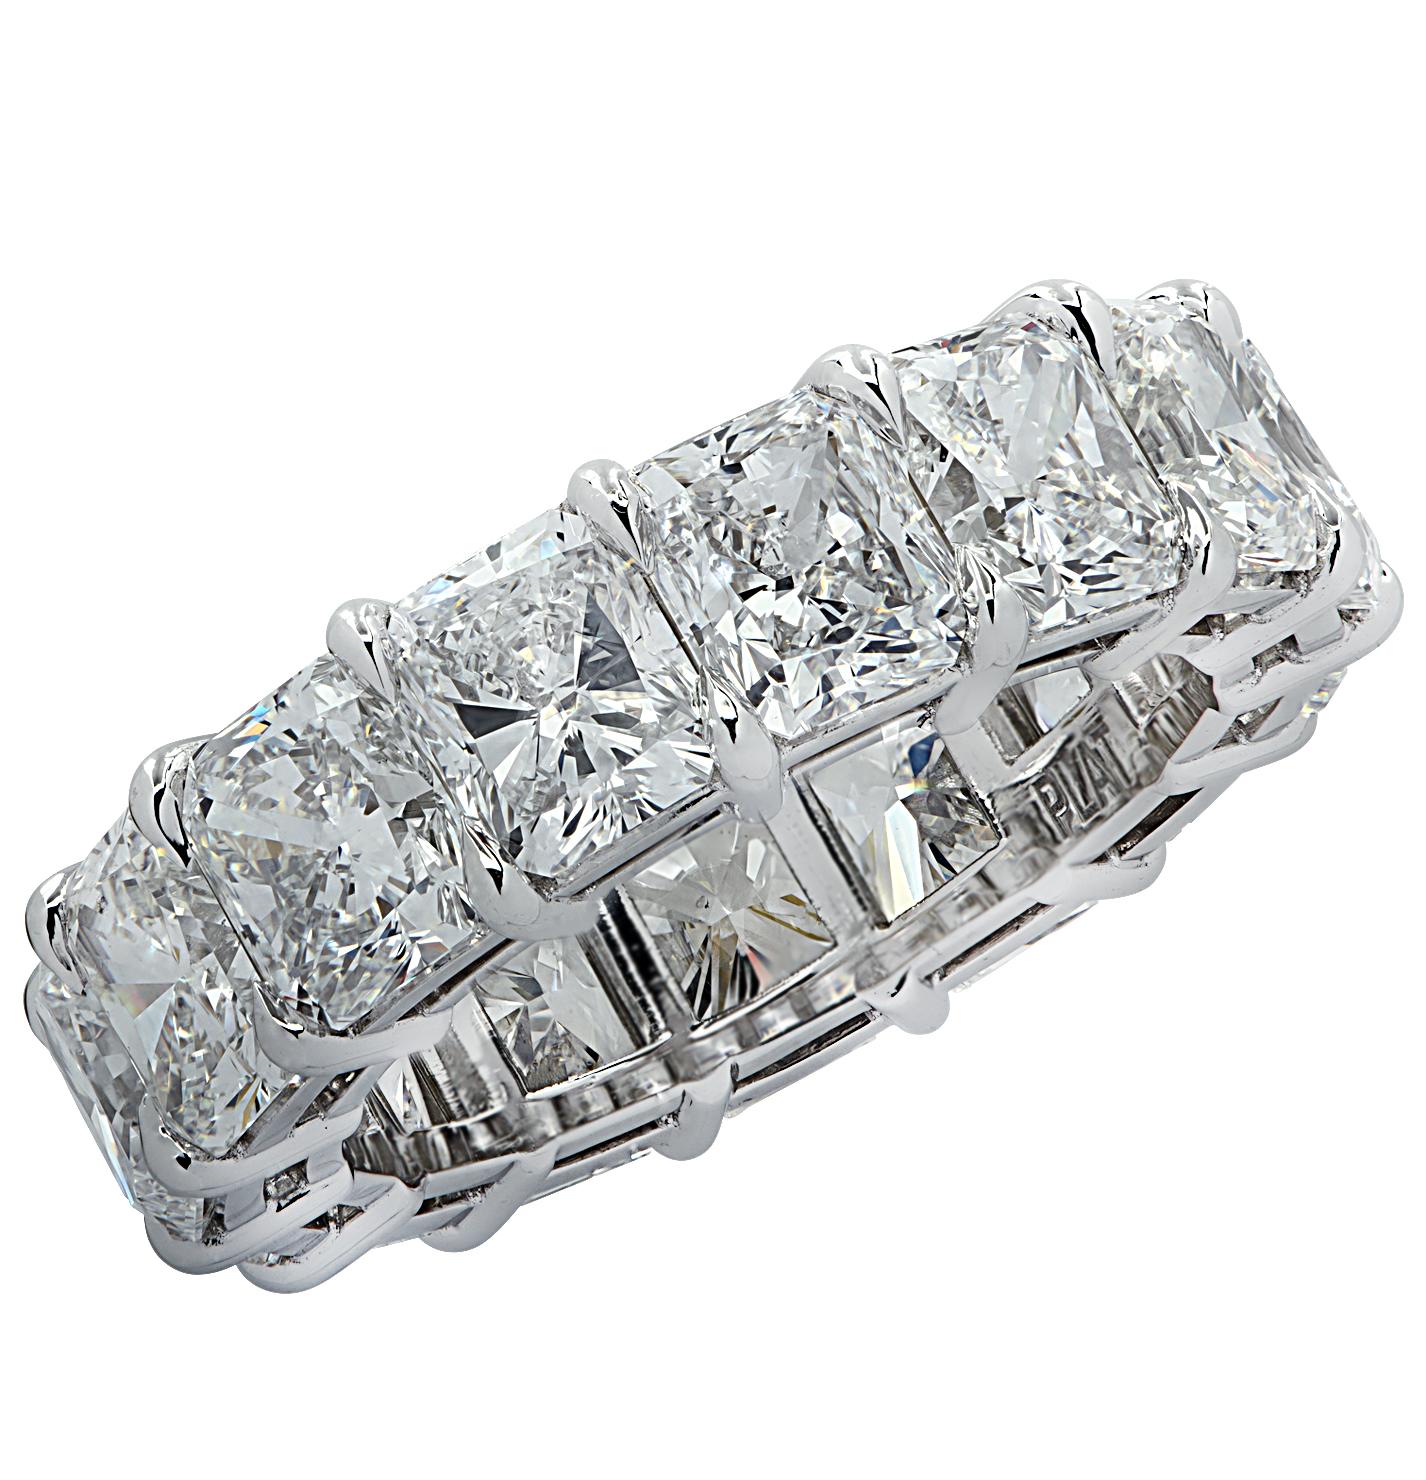 Breathtaking Vivid Diamonds Eternity Band finely crafted in platinum, featuring 15 exquisite GIA certified radiant cut diamonds weighing 11.09 carats total, D-F color, VVS-VS clarity. Each diamond was carefully selected, perfectly matched and set in